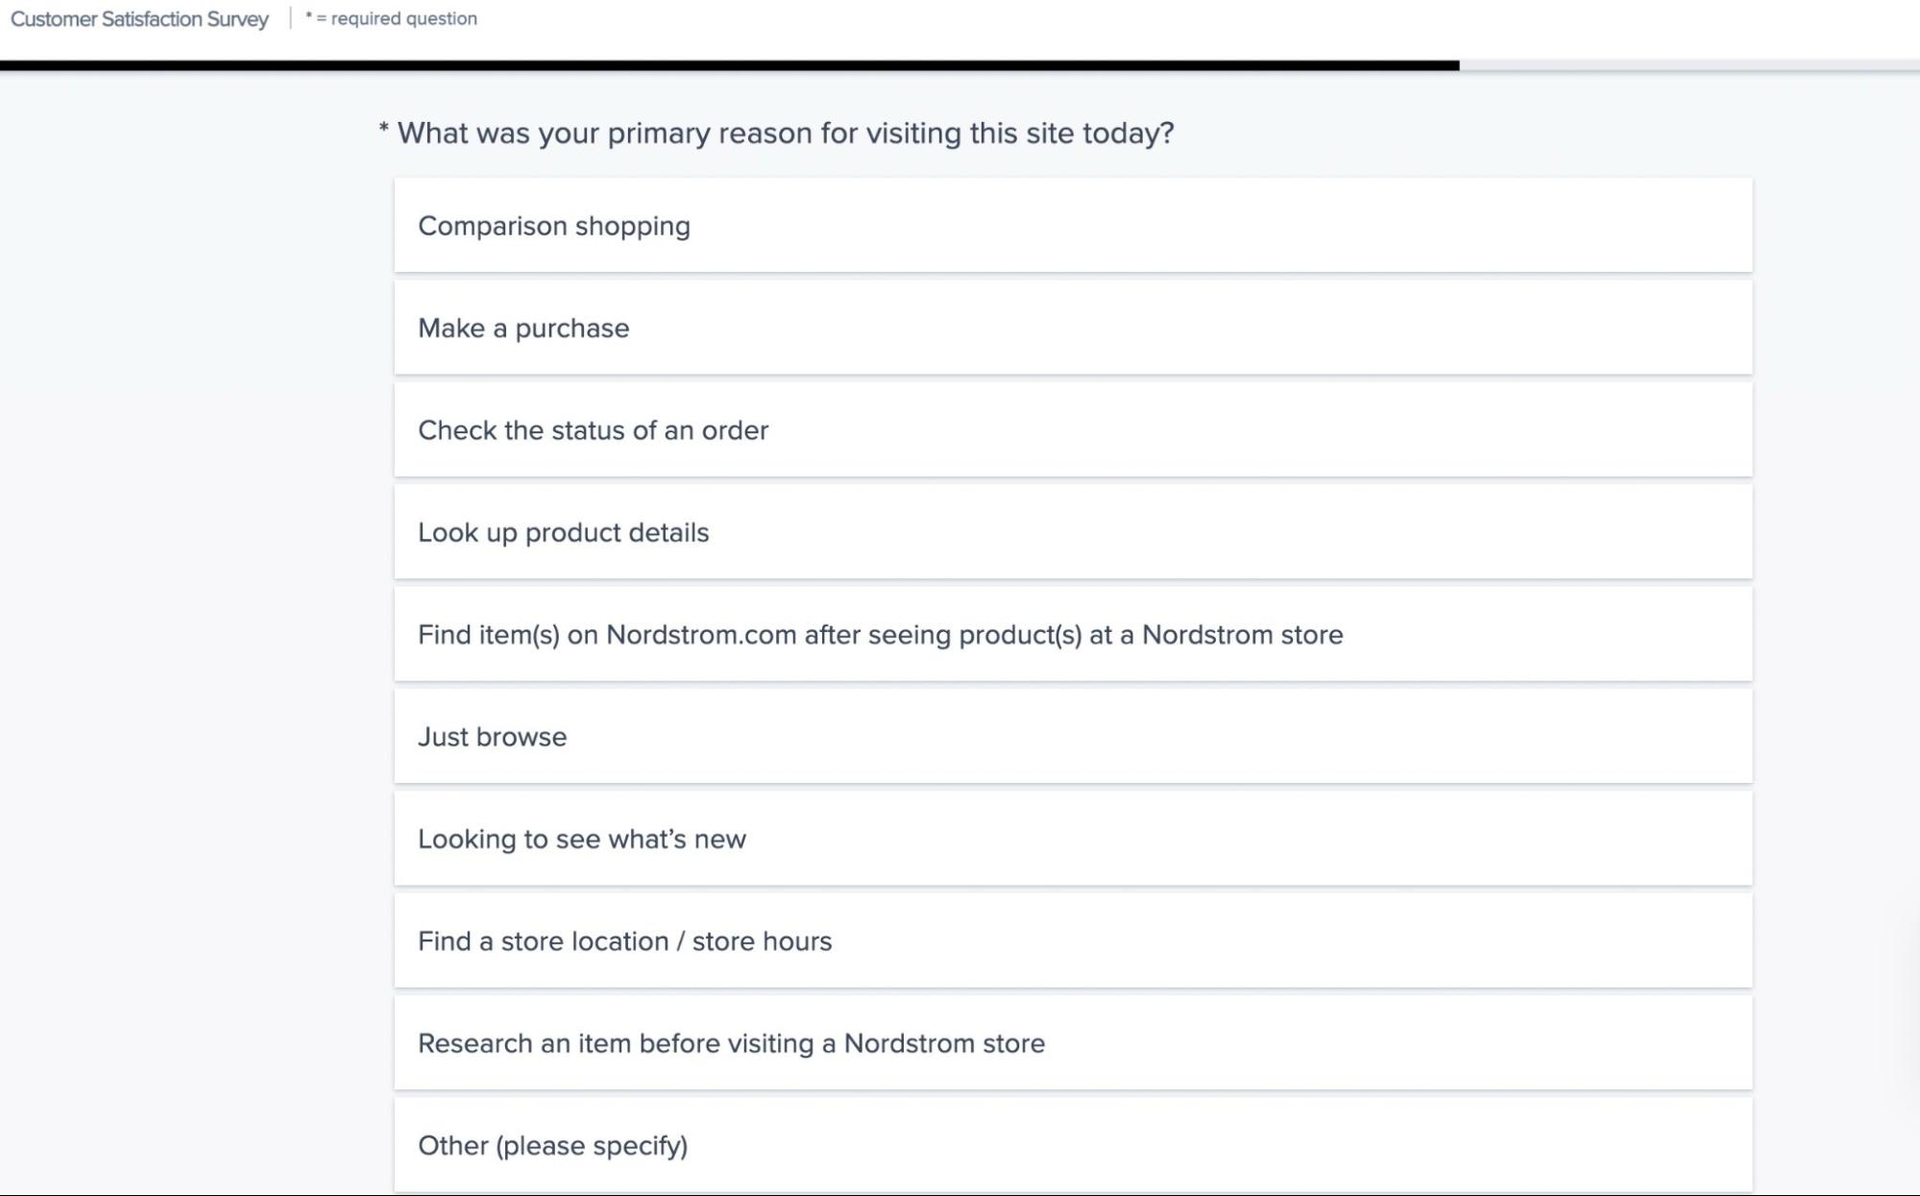 An example of a nominal question from Nordstrom's CSAT survey, asking: what was your primary reason for visiting the site? Followed by a number of  close-ended responses.